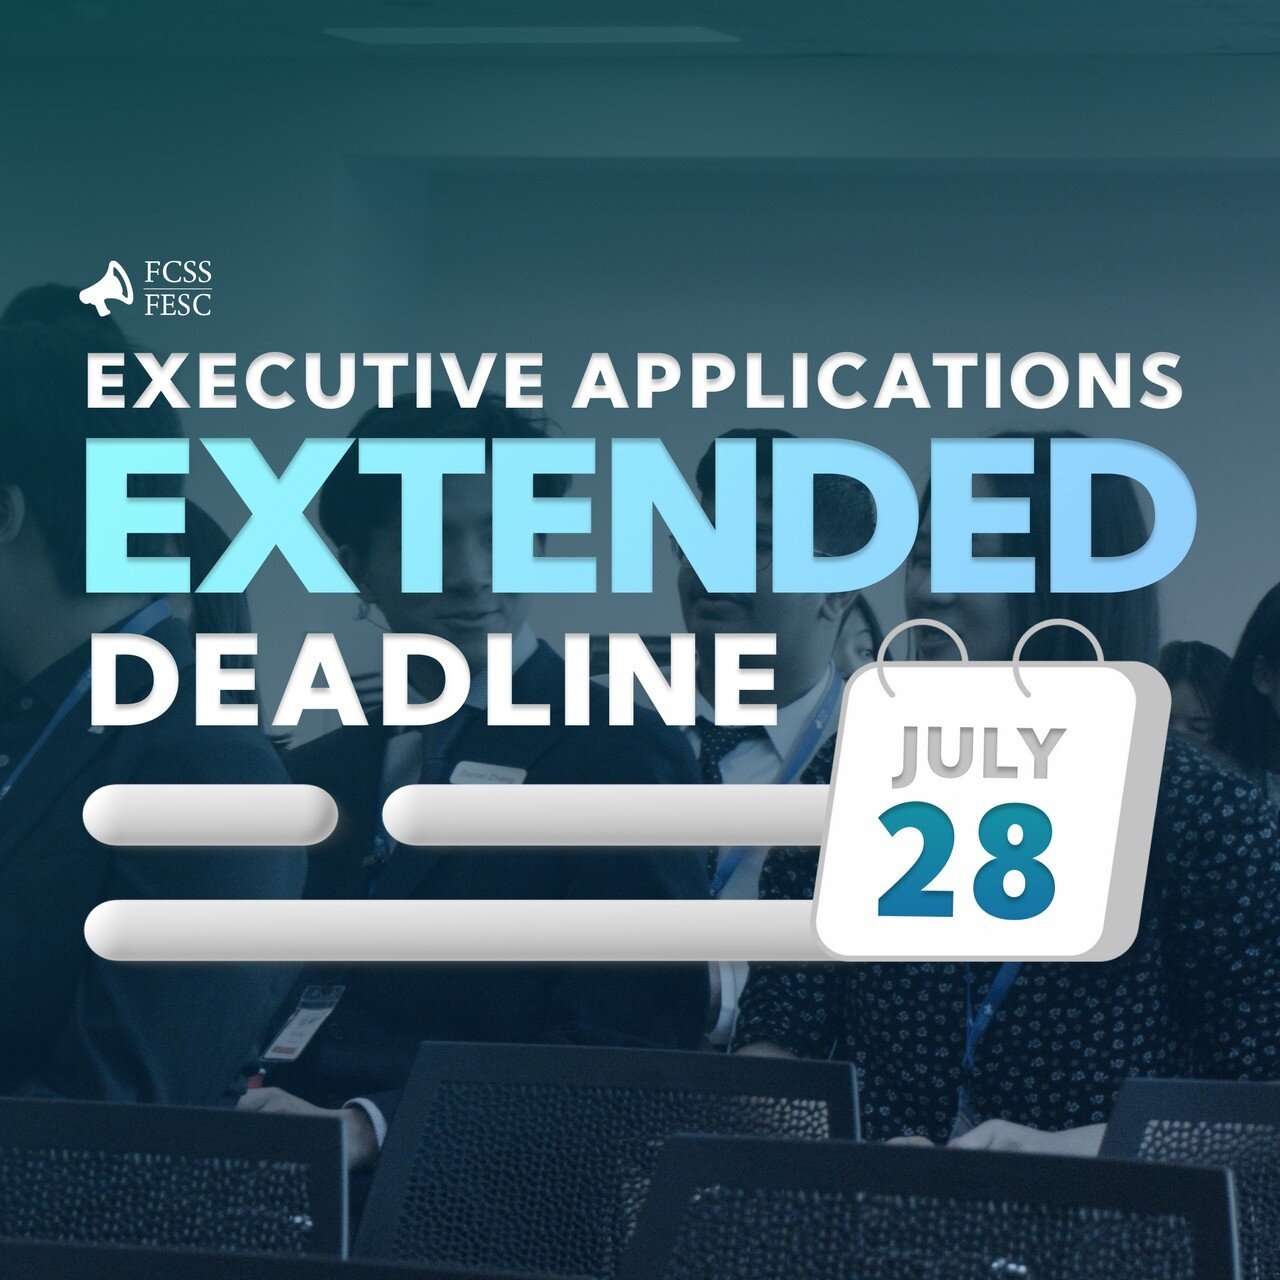 DEADLINE EXTENDED! Gain volunteer hours and leadership experience working for a Federally-registered youth-led charity. Apply through link in bio by July 28th at 11:59 p.m. ET! ⁠
⁠
#fcss #executive #charity #volunteer #nonprofit #highschool #policy #